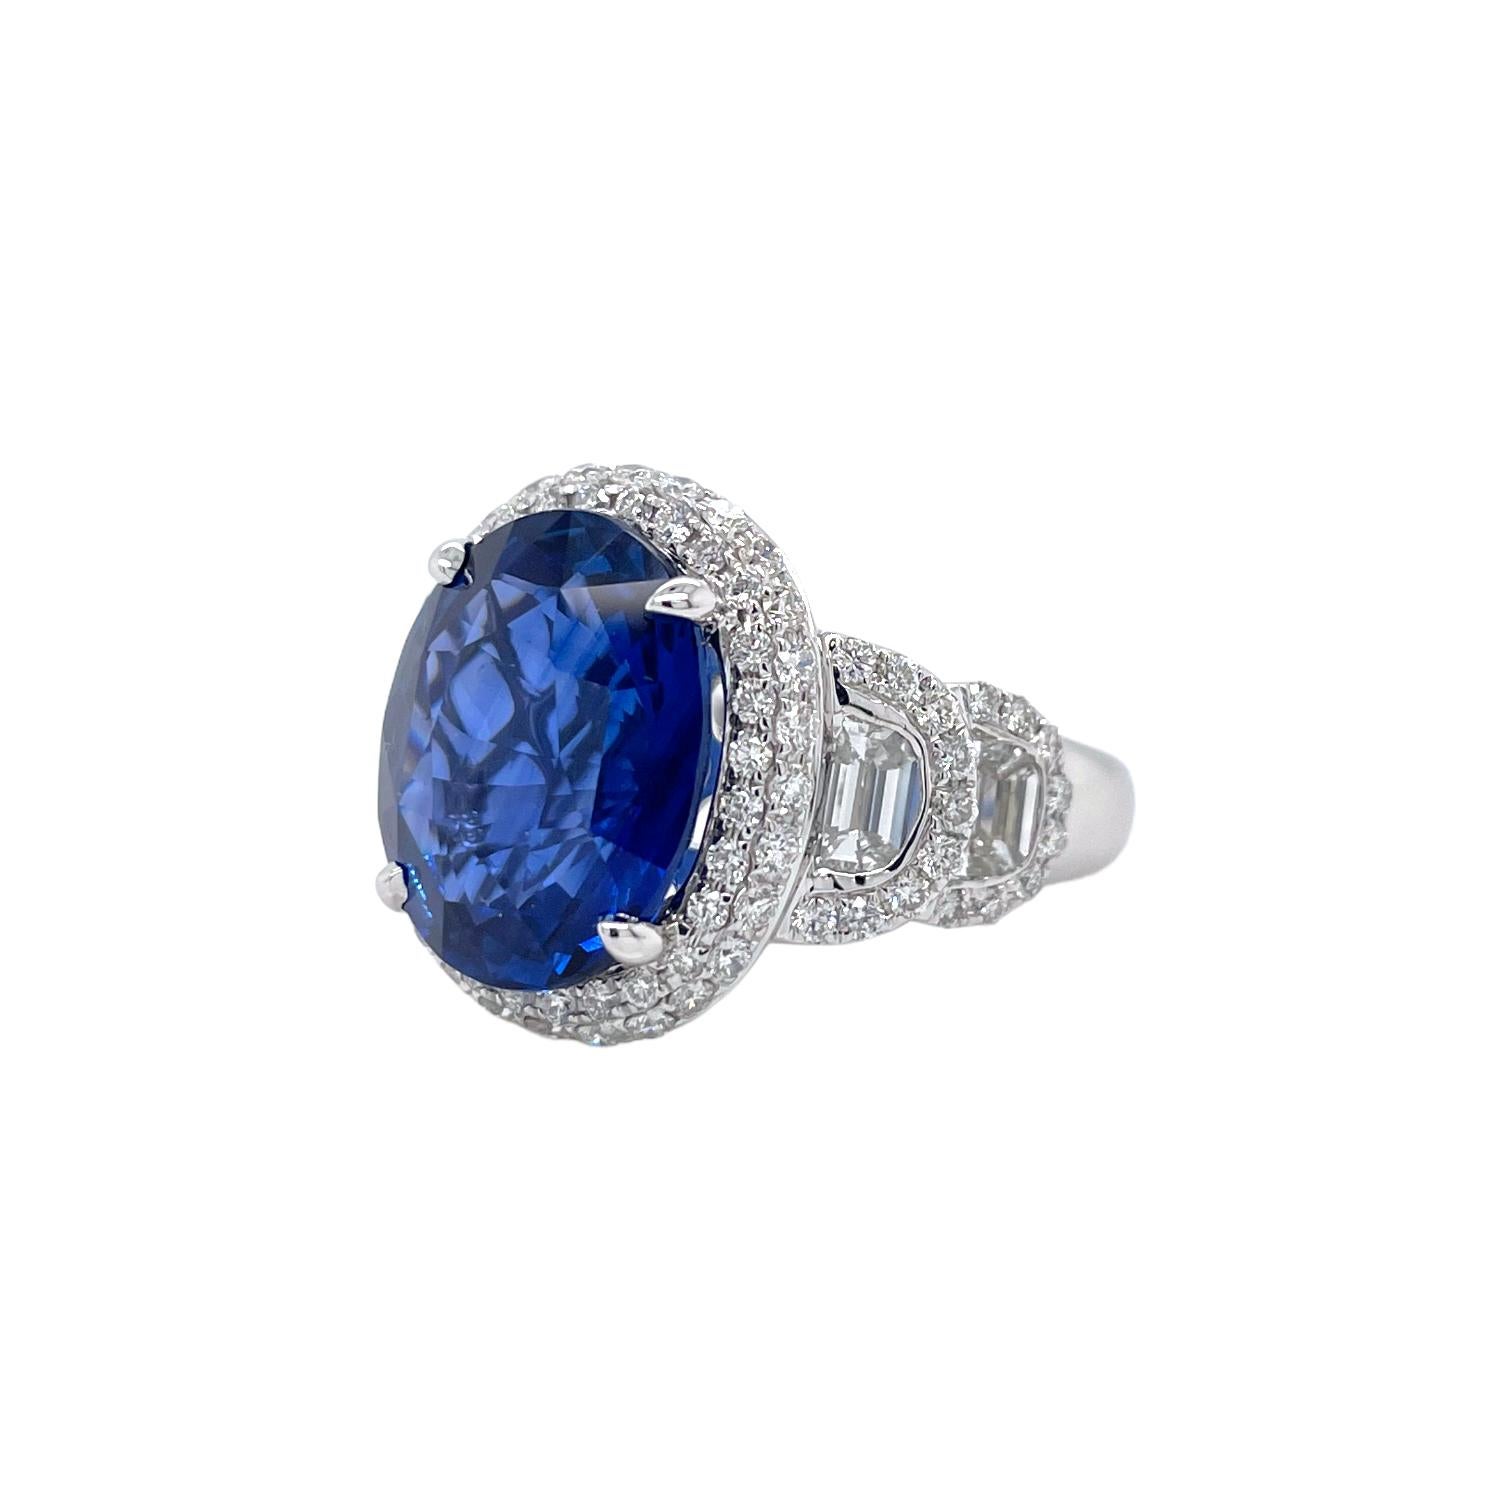 Ring contains one center oval brilliant shape sapphire 8.09ct, 4 half-moon diamonds 1.16tcw and round brilliant diamonds 0.94tcw. Center sapphire is C. Dunaigre certified, measuring 13.4x10.79mm. All diamonds are G in color and VS2 in clarity. Ring